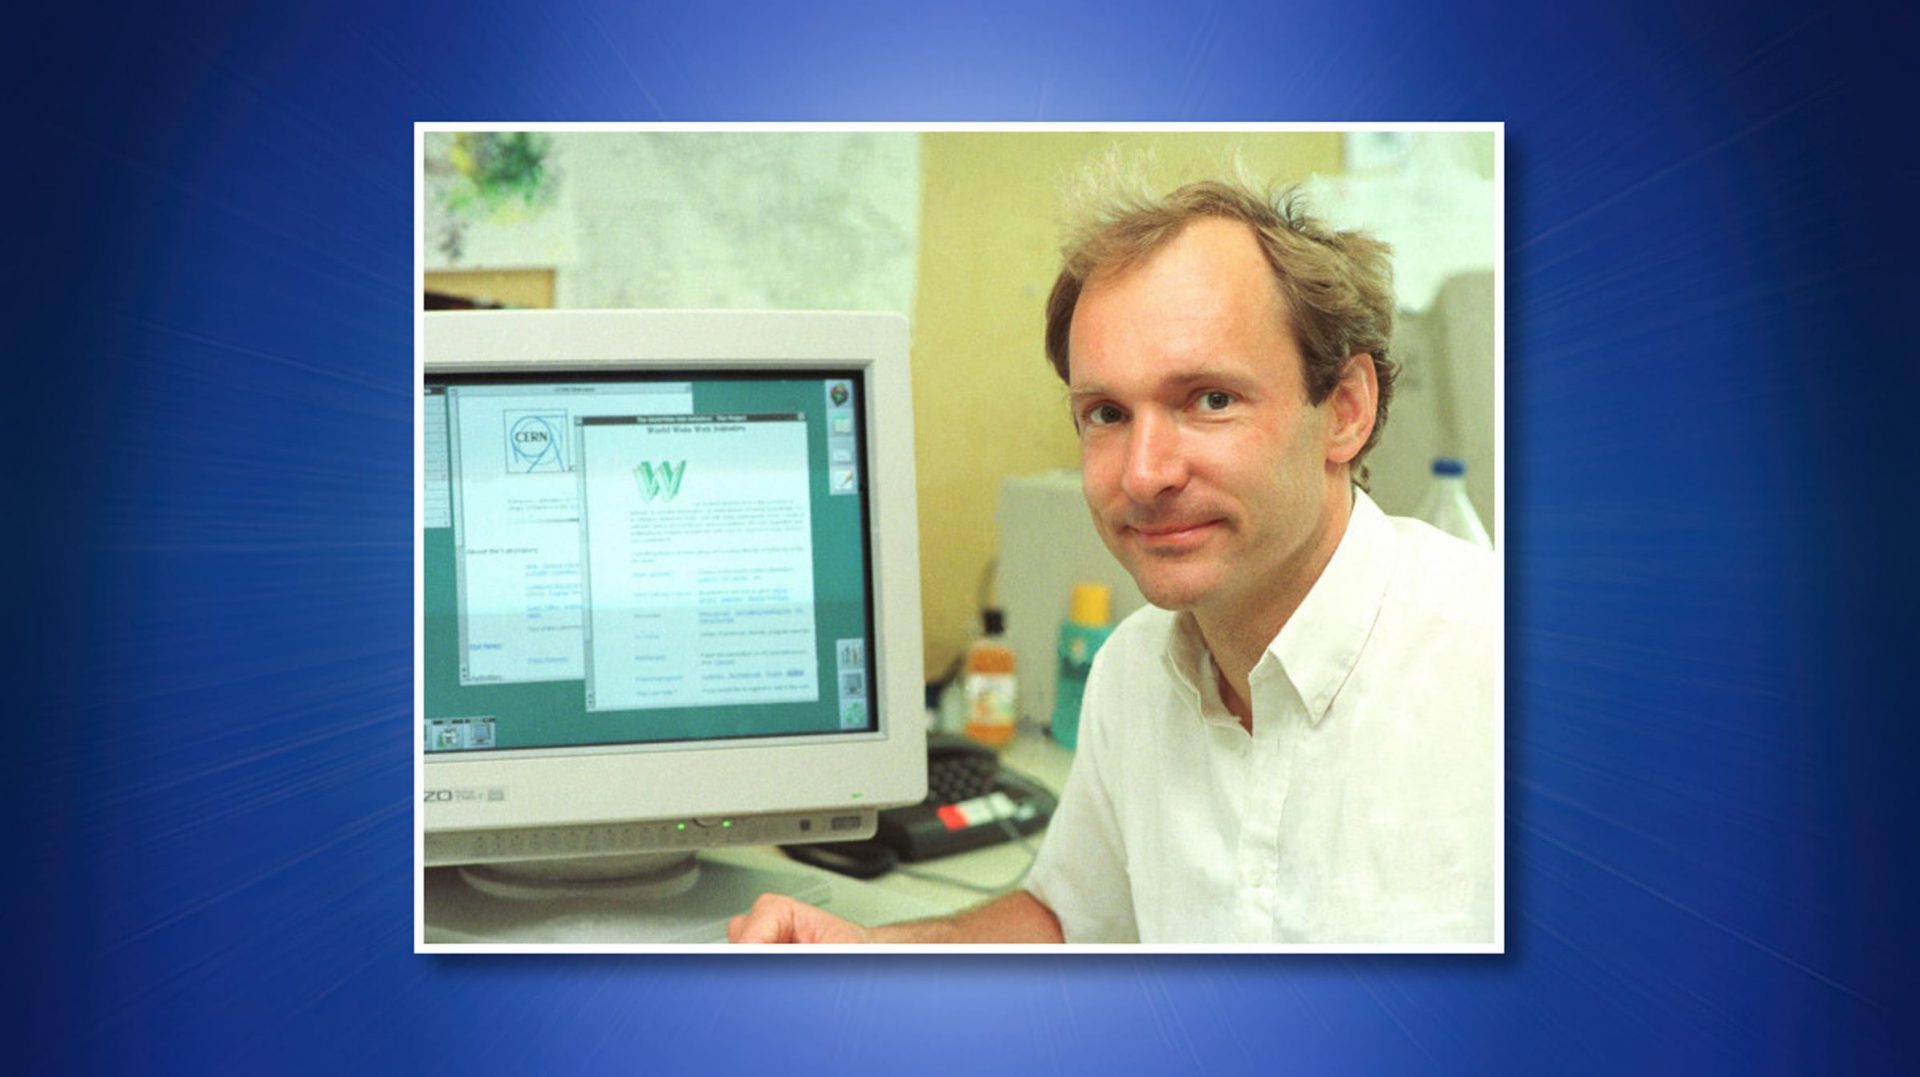 The First Web space: How the Web Looked 30 Years Ago